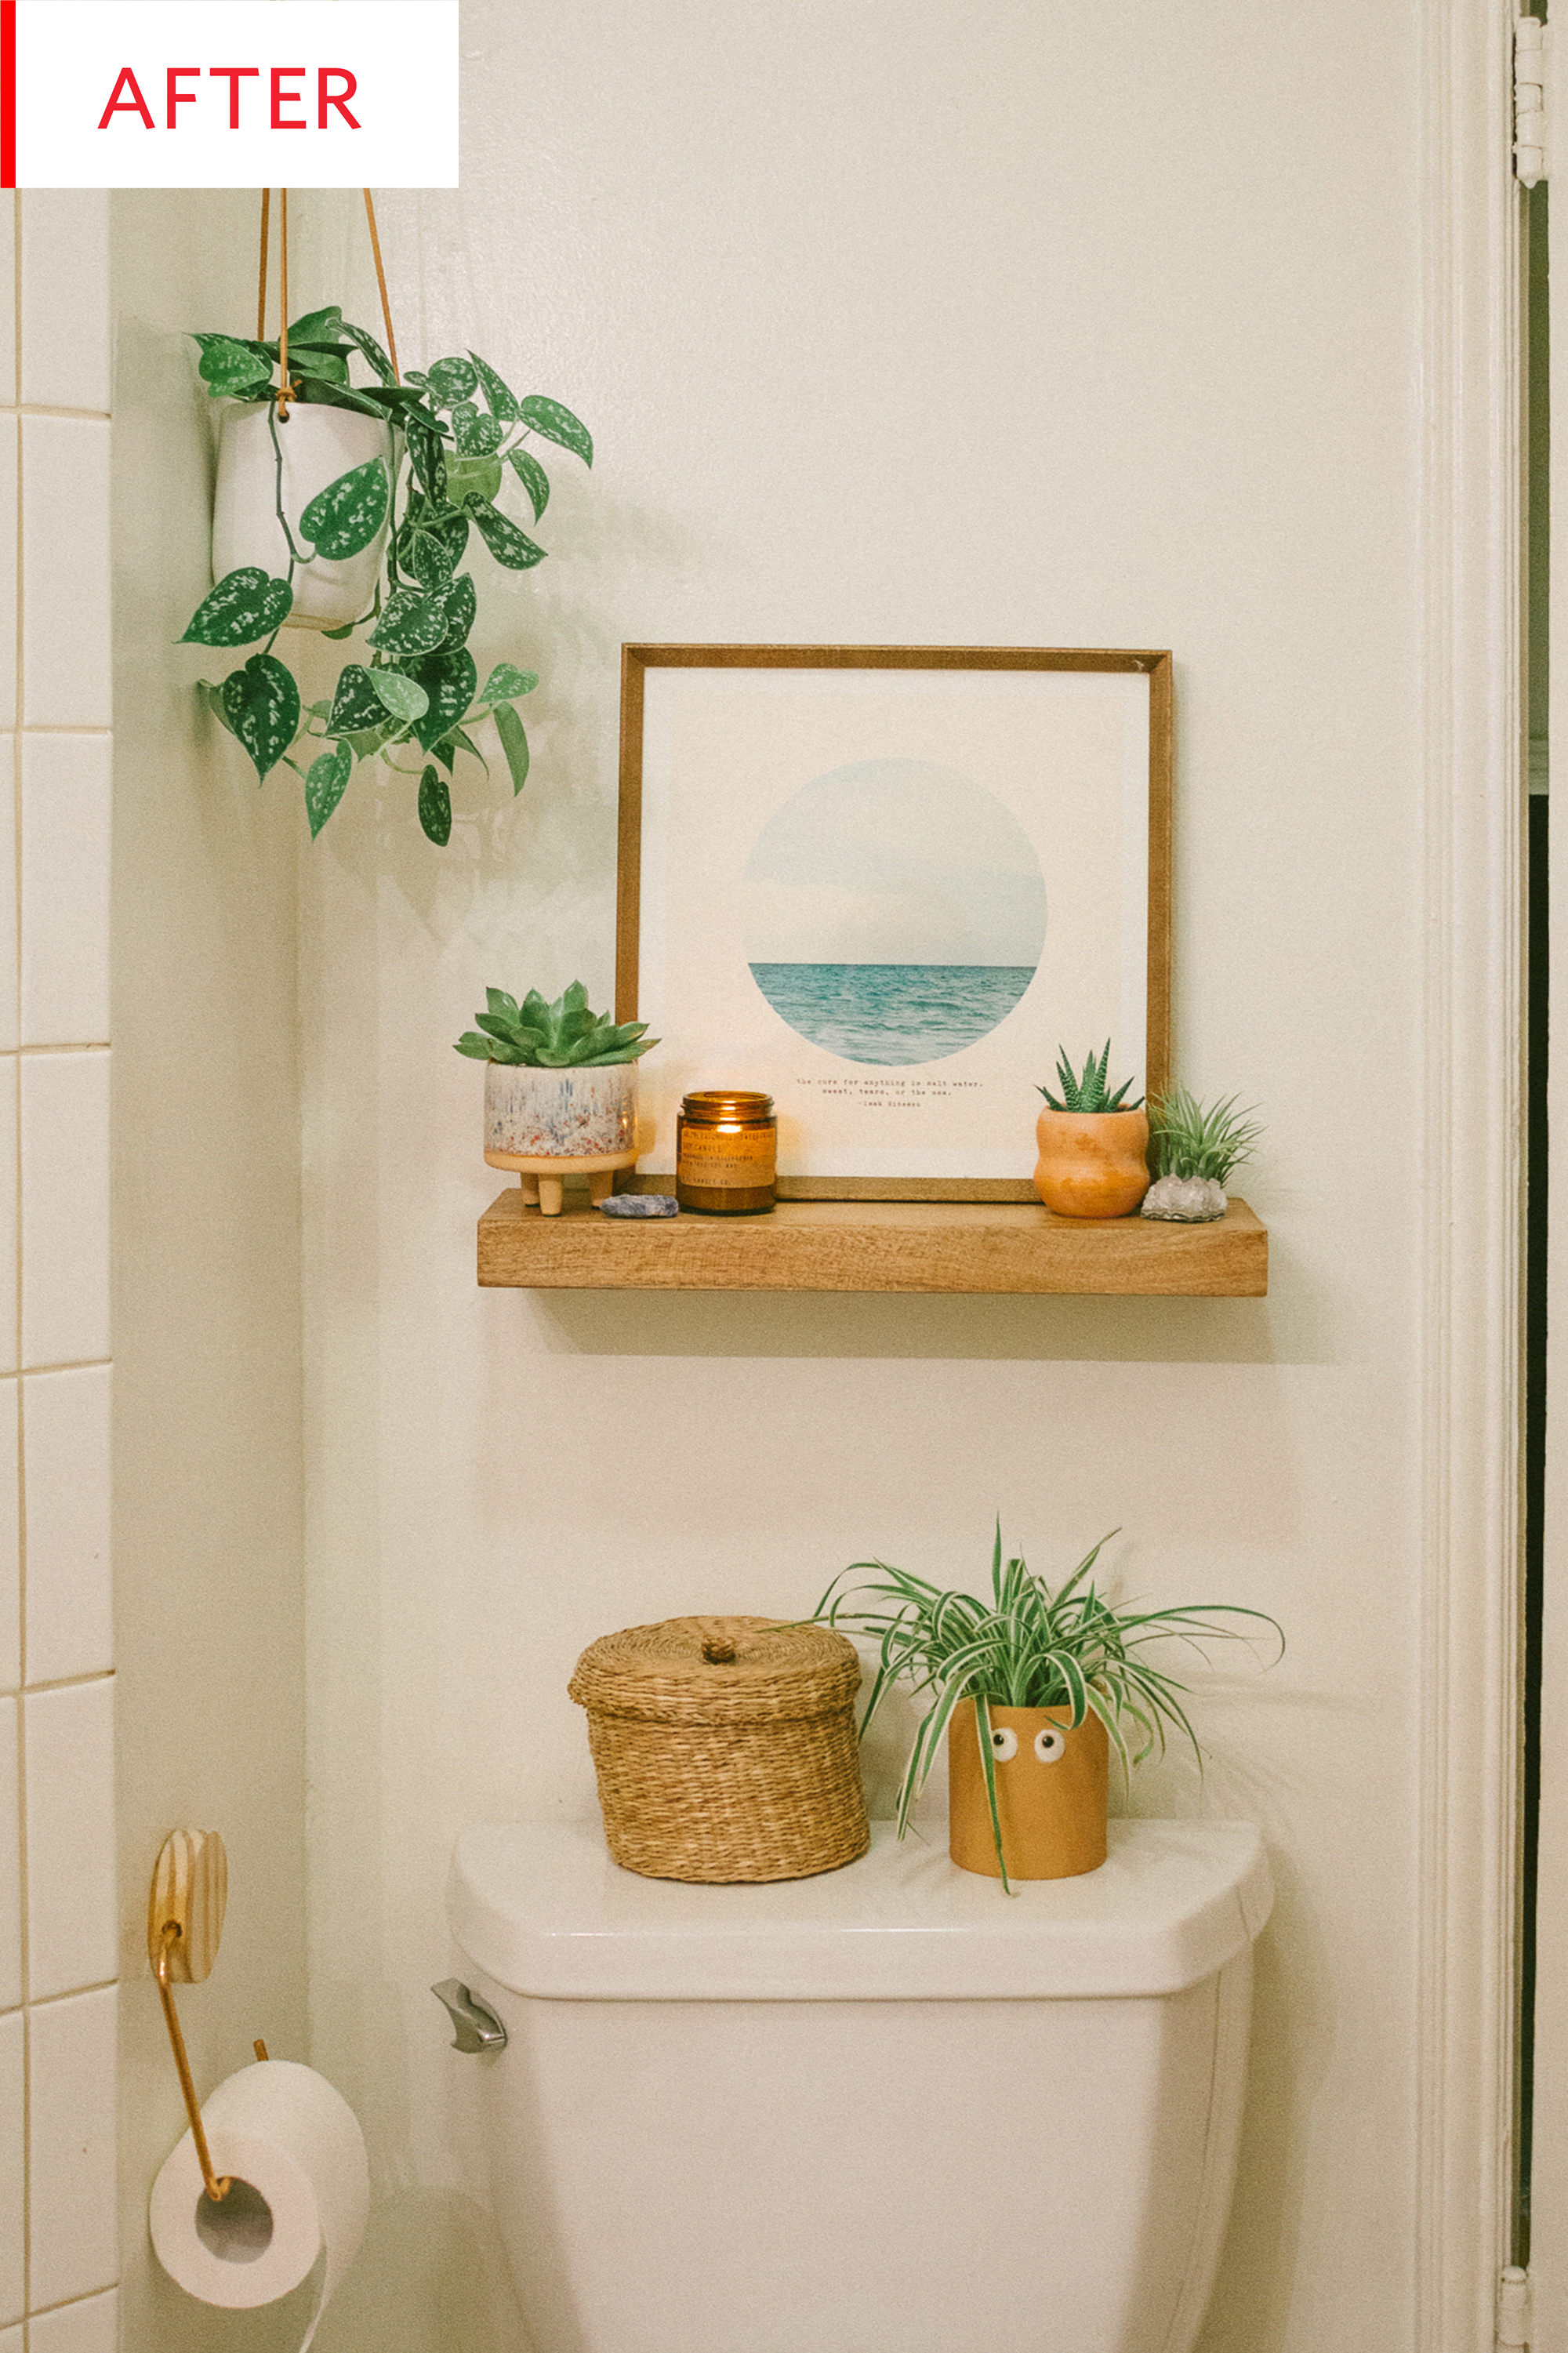 8 of the best bathroom tile stickers for a quick and affordable